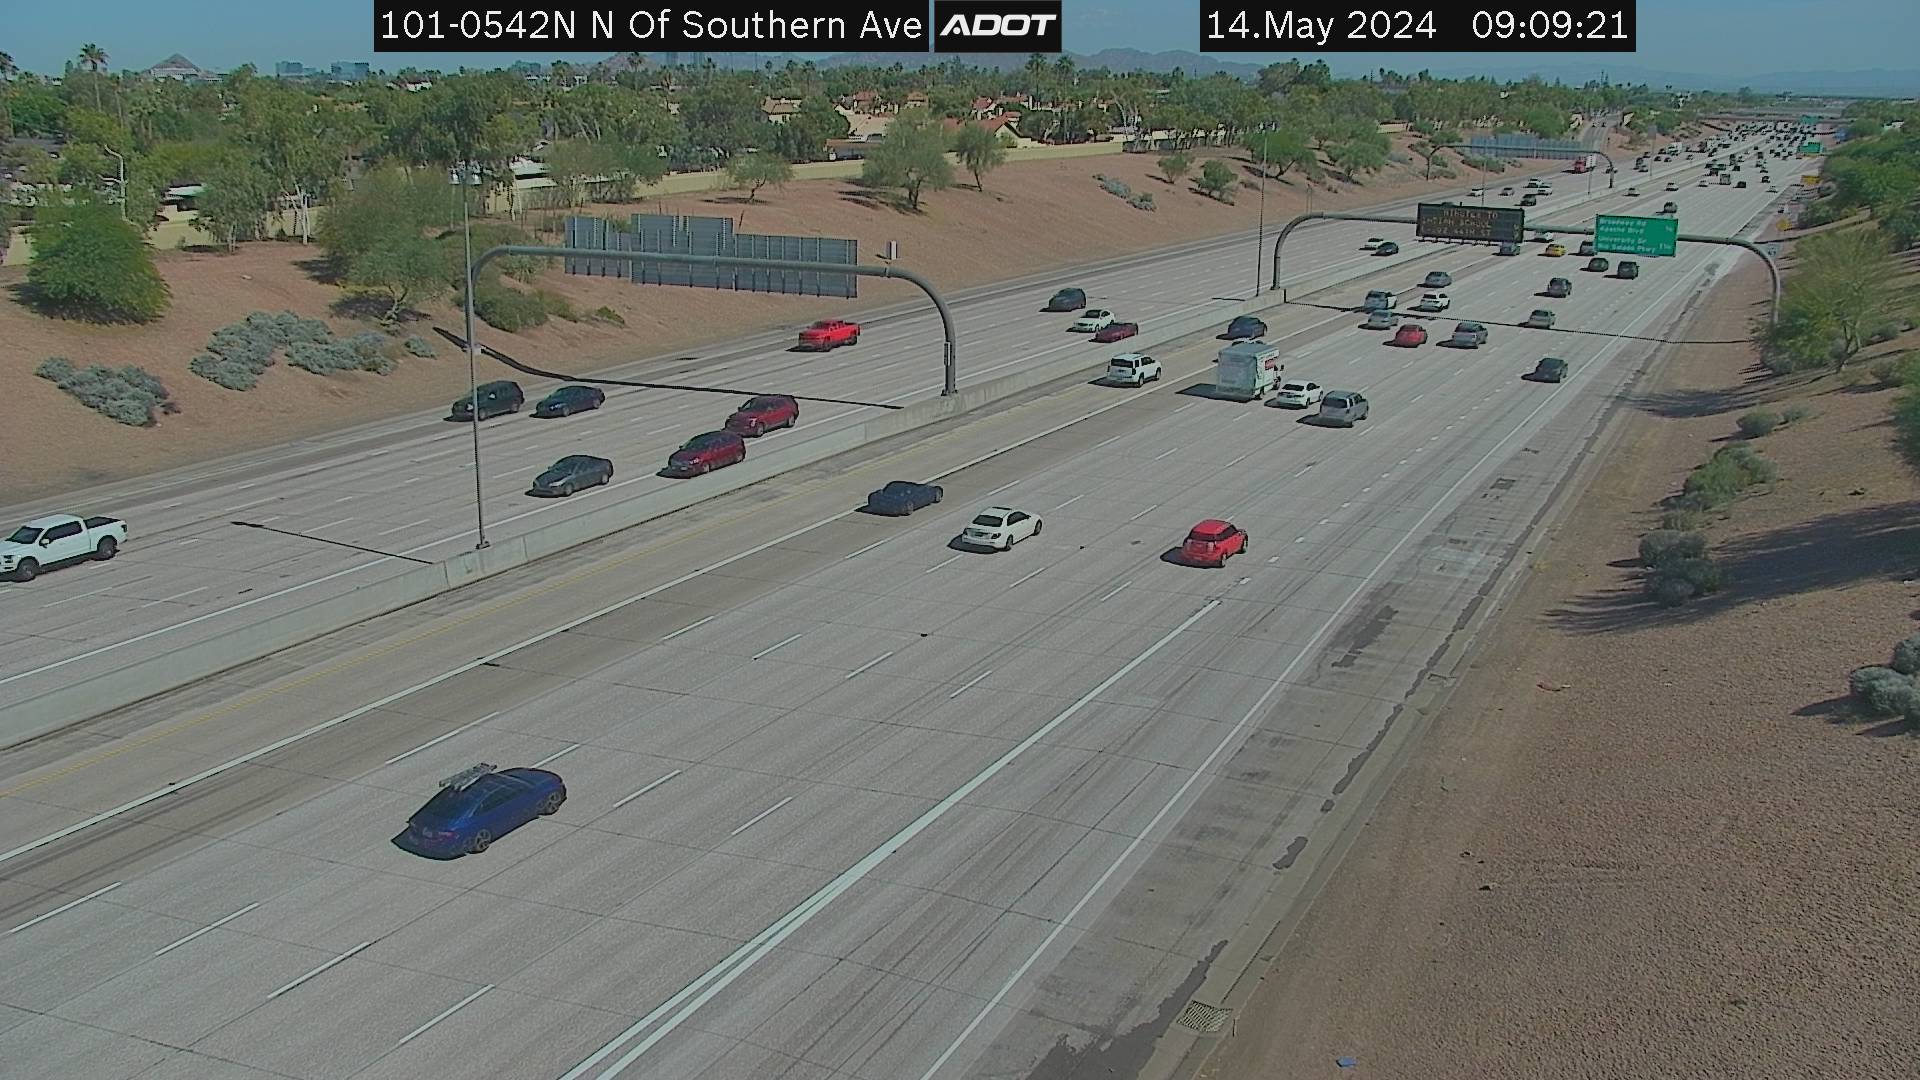 Traffic Cam L-101 NB 54.23 @N of Southern -  Northbound Player